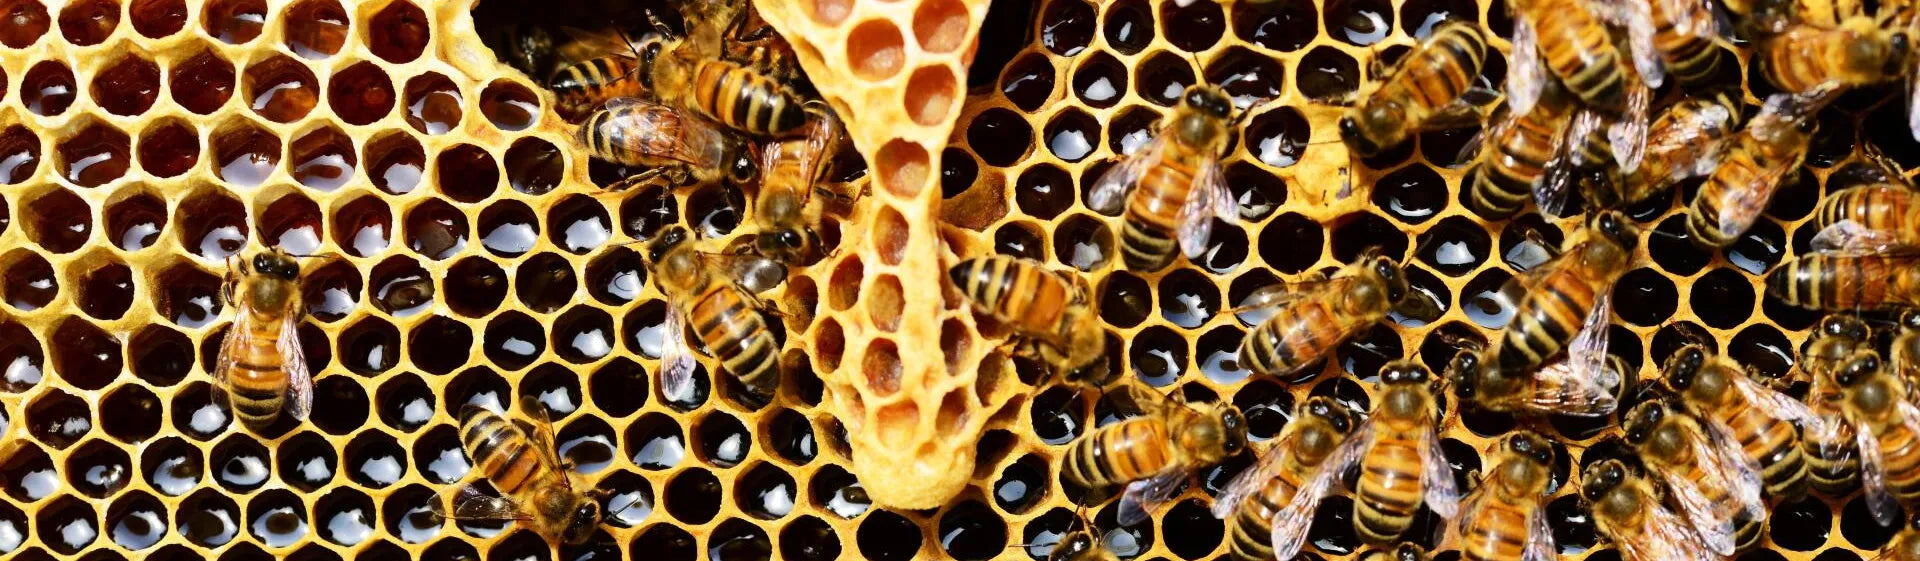 bees on a honeycomb dripping with honey